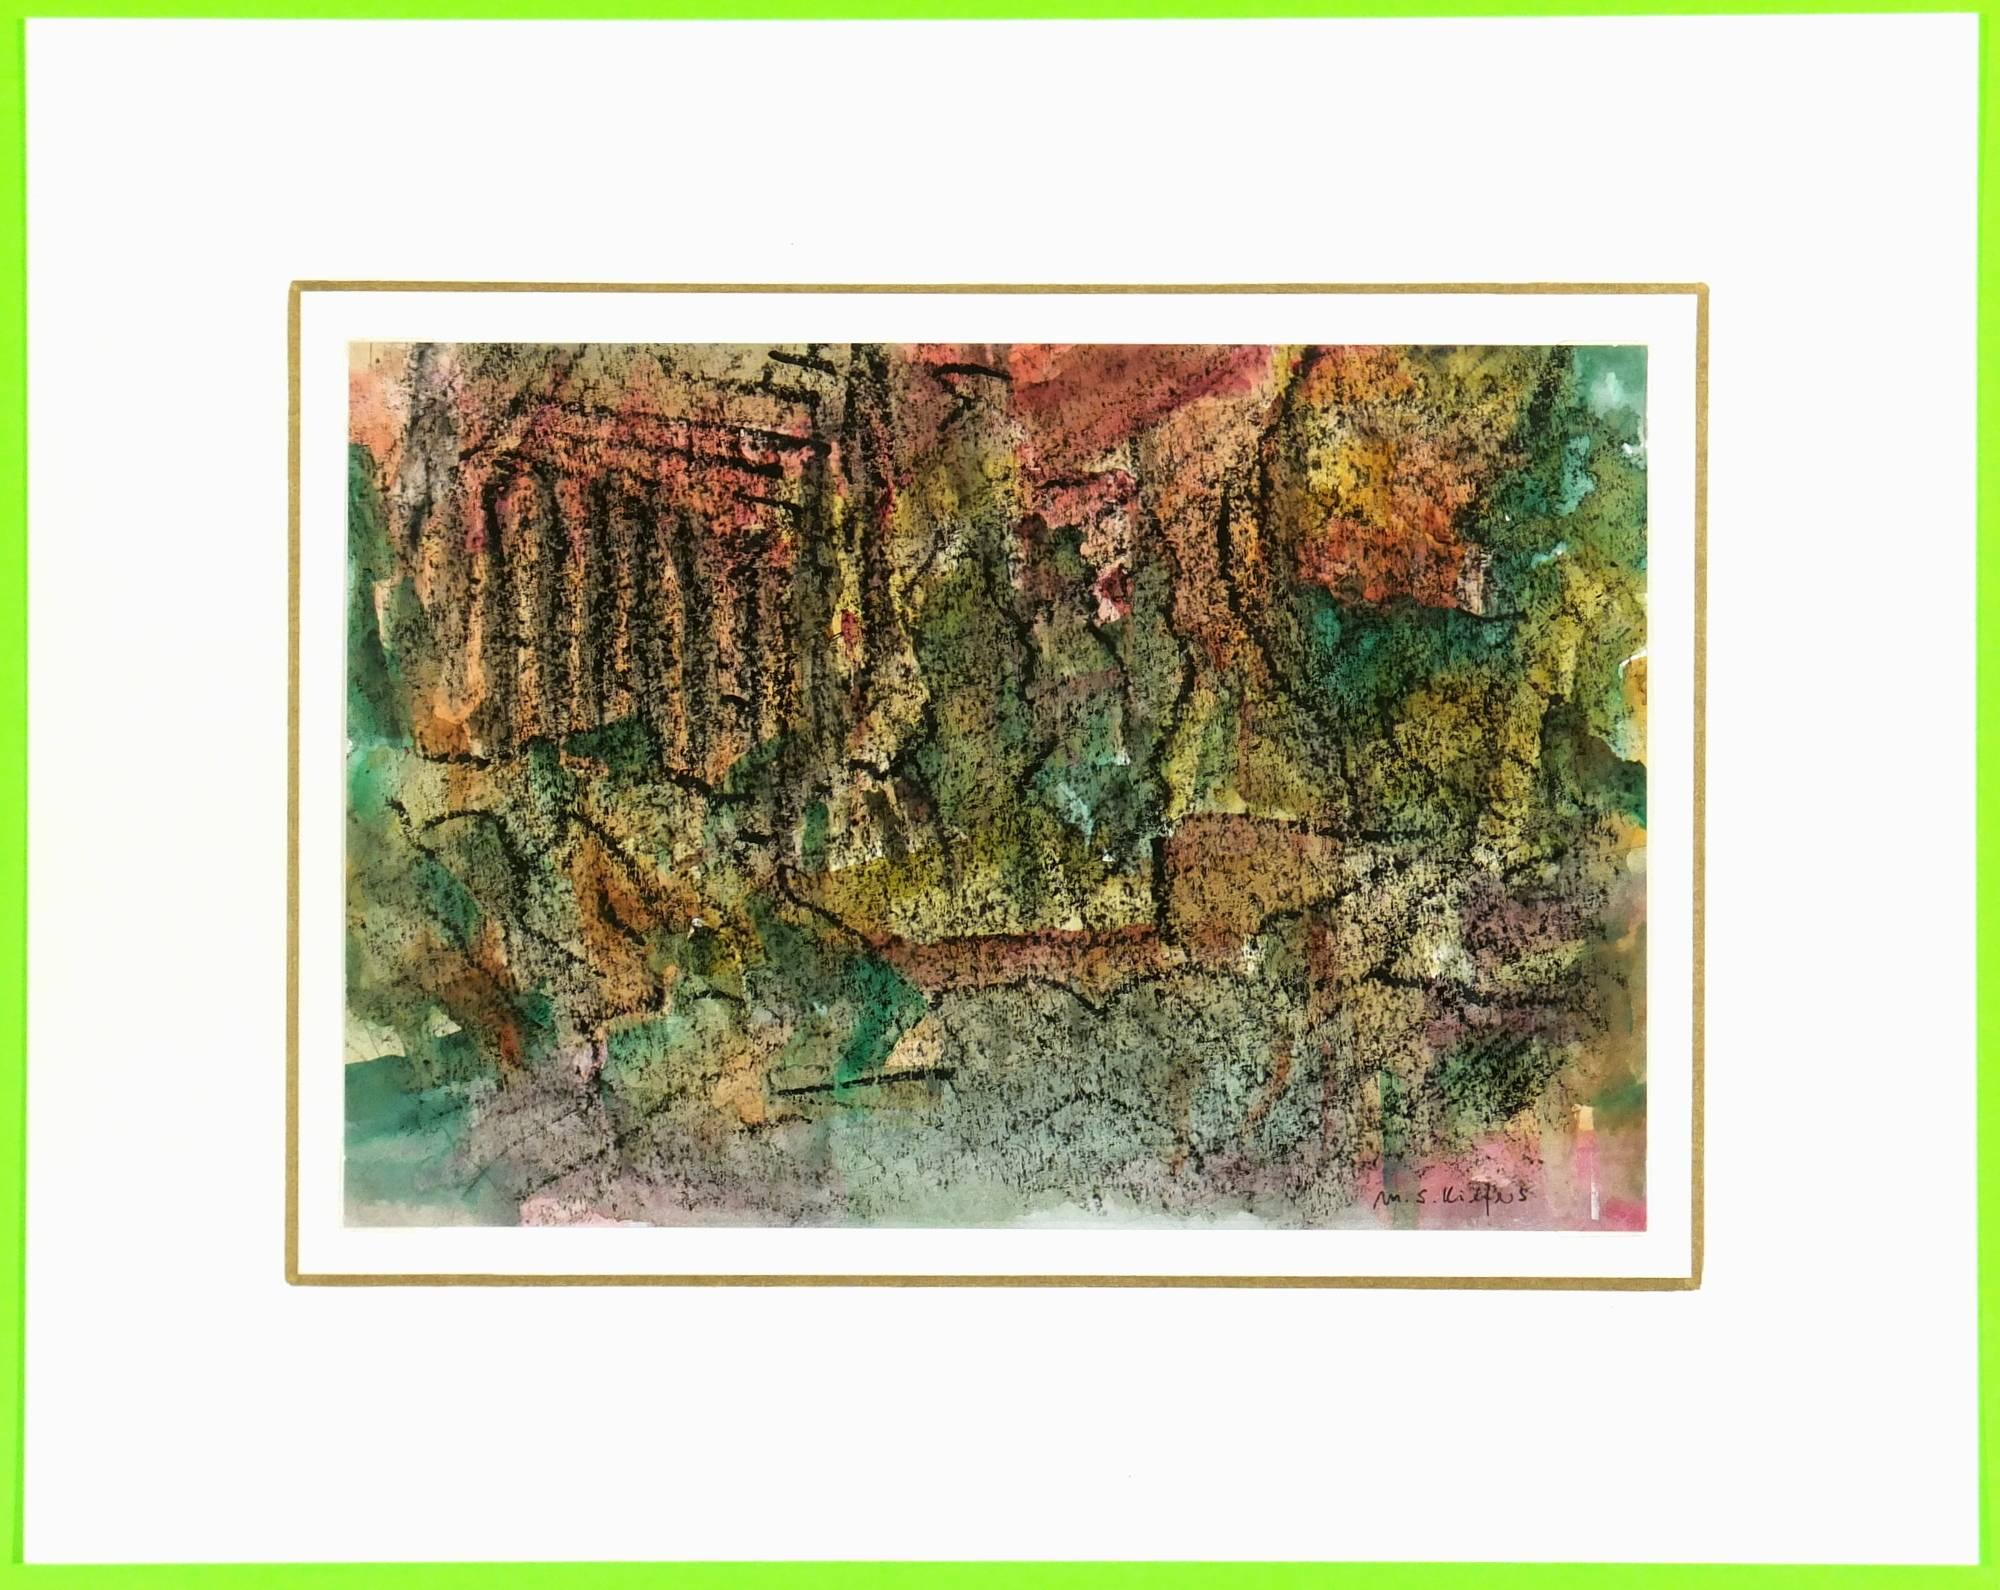 Bright abstract watercolor with green, browns, and reds, circa 1980.  Signed lower right.   

Original artwork on paper displayed on a white mat with a gold border. Mat fits a standard-size frame.  Archival plastic sleeve and Certificate of